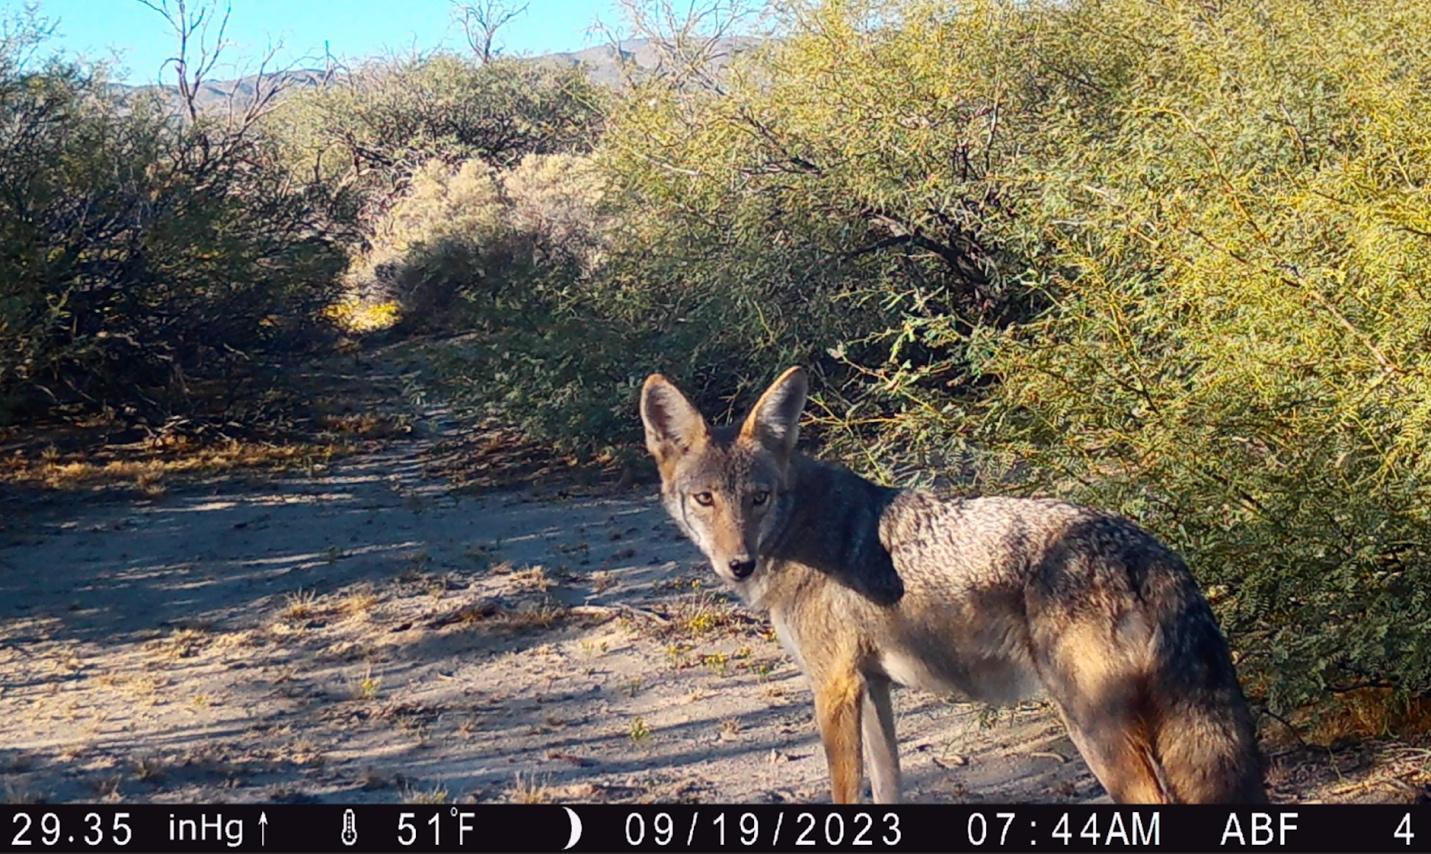 A coyote standing in the desert

Description automatically generated